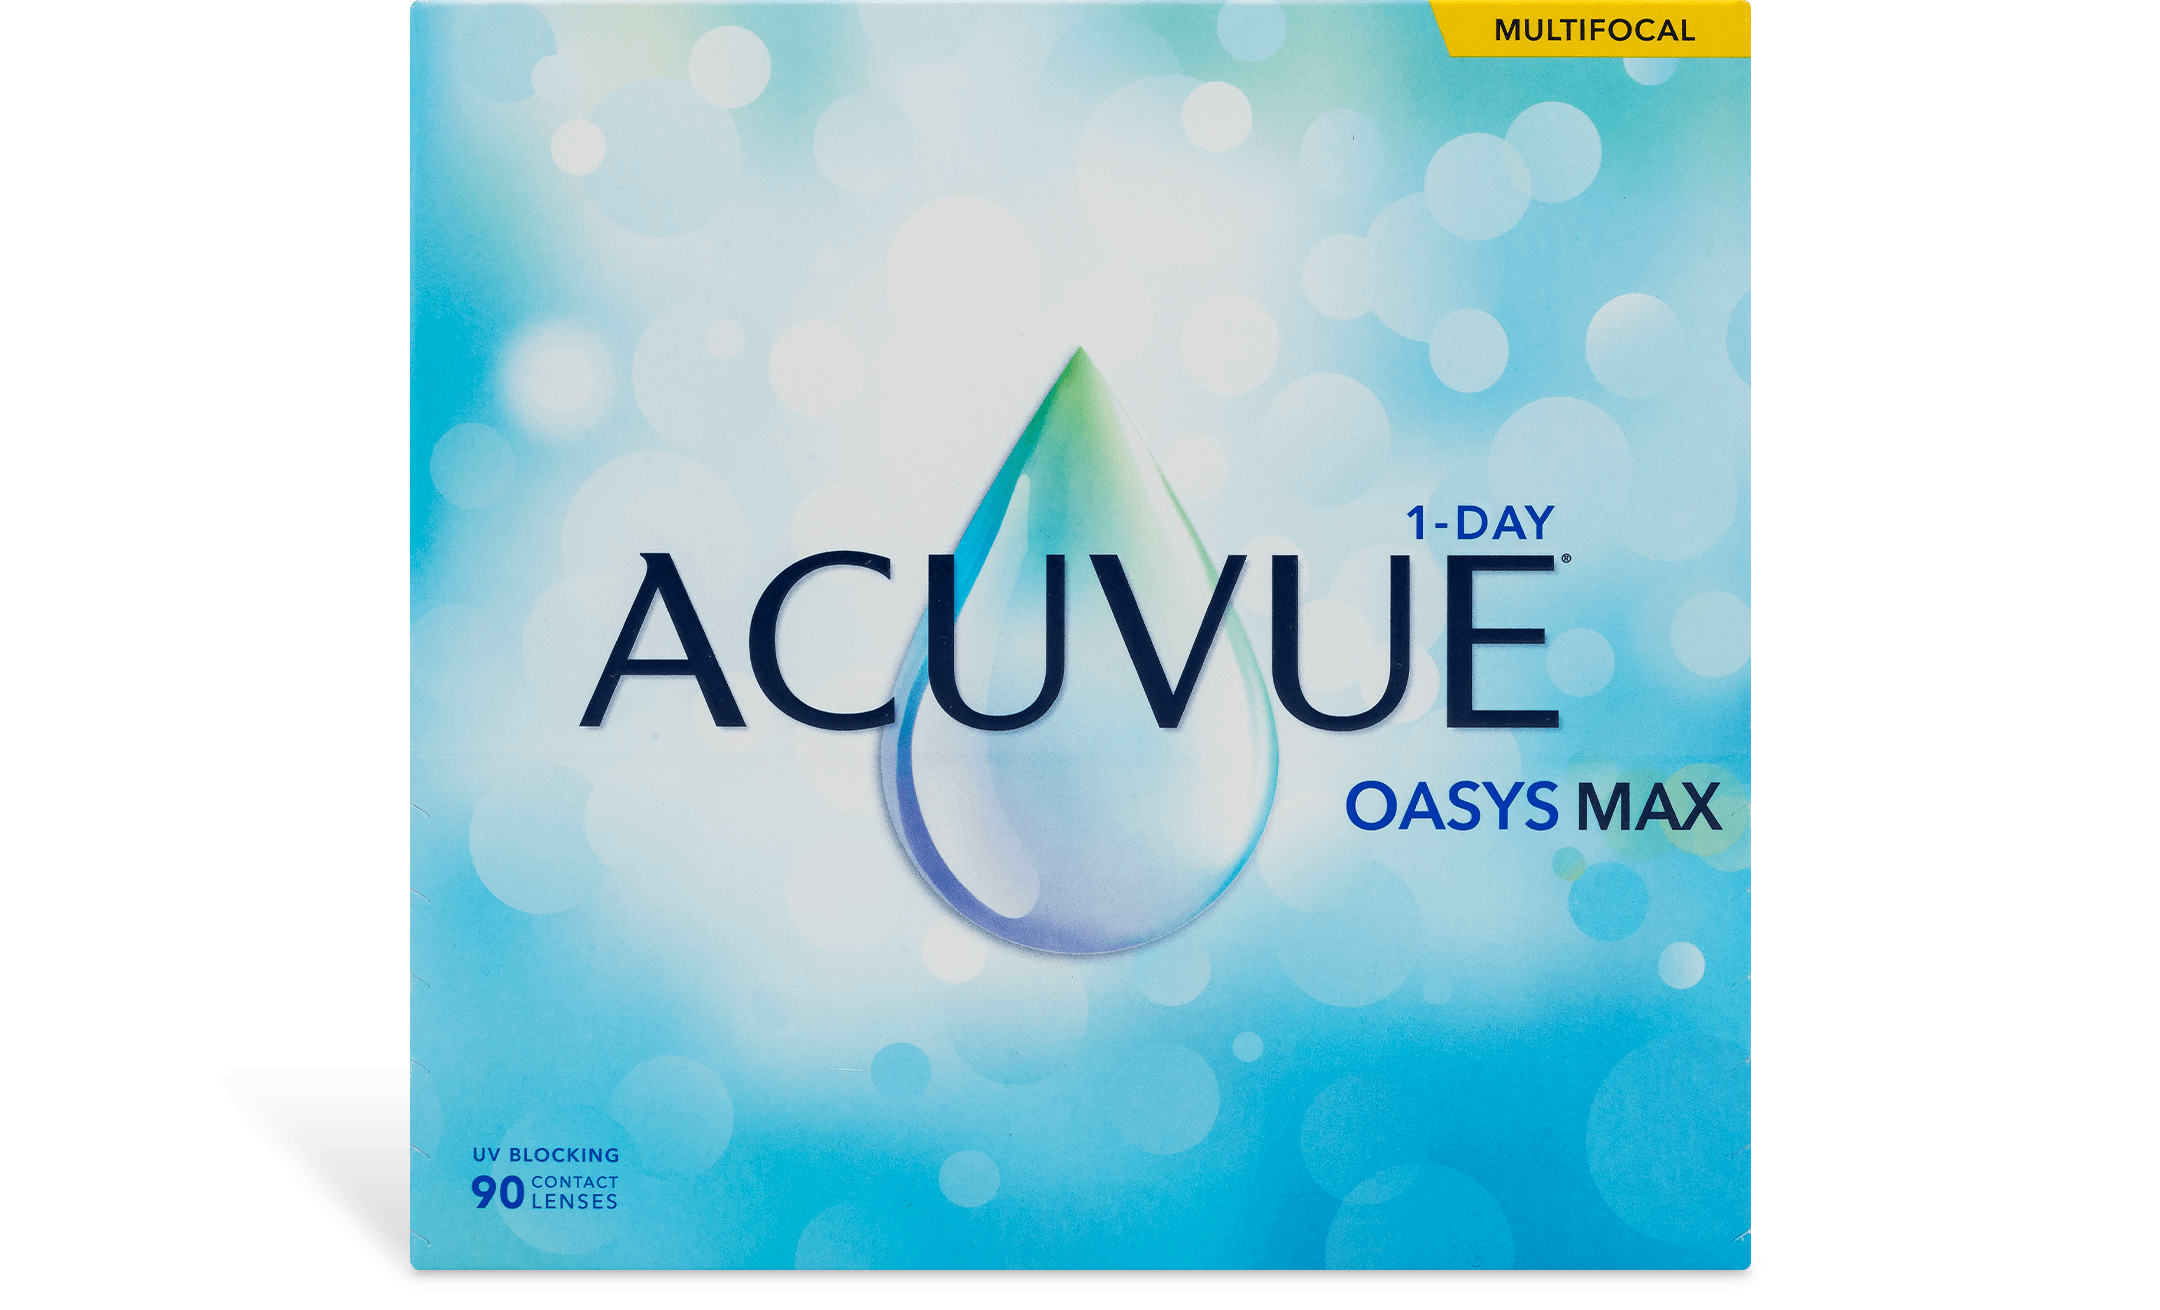 Acuvue Oasys Max 1 Day Multifocal Contact Lenses 1 800 Contacts